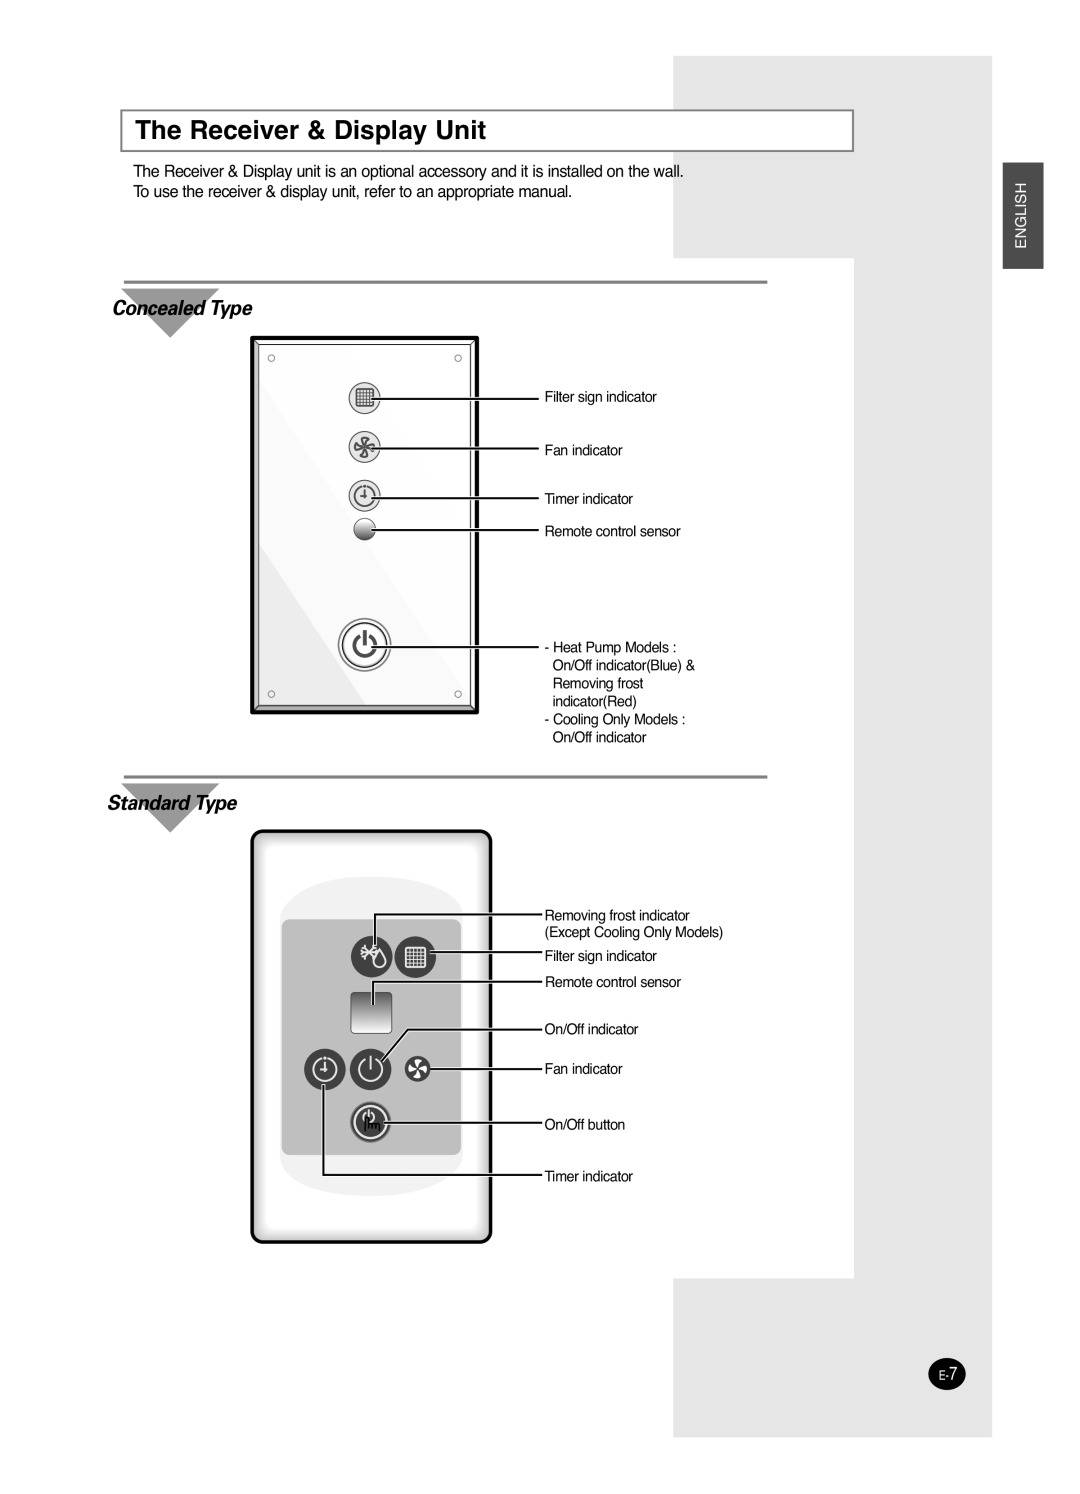 Samsung AVMDH(C) user manual The Receiver & Display Unit, Concealed Type, Standard Type, English 